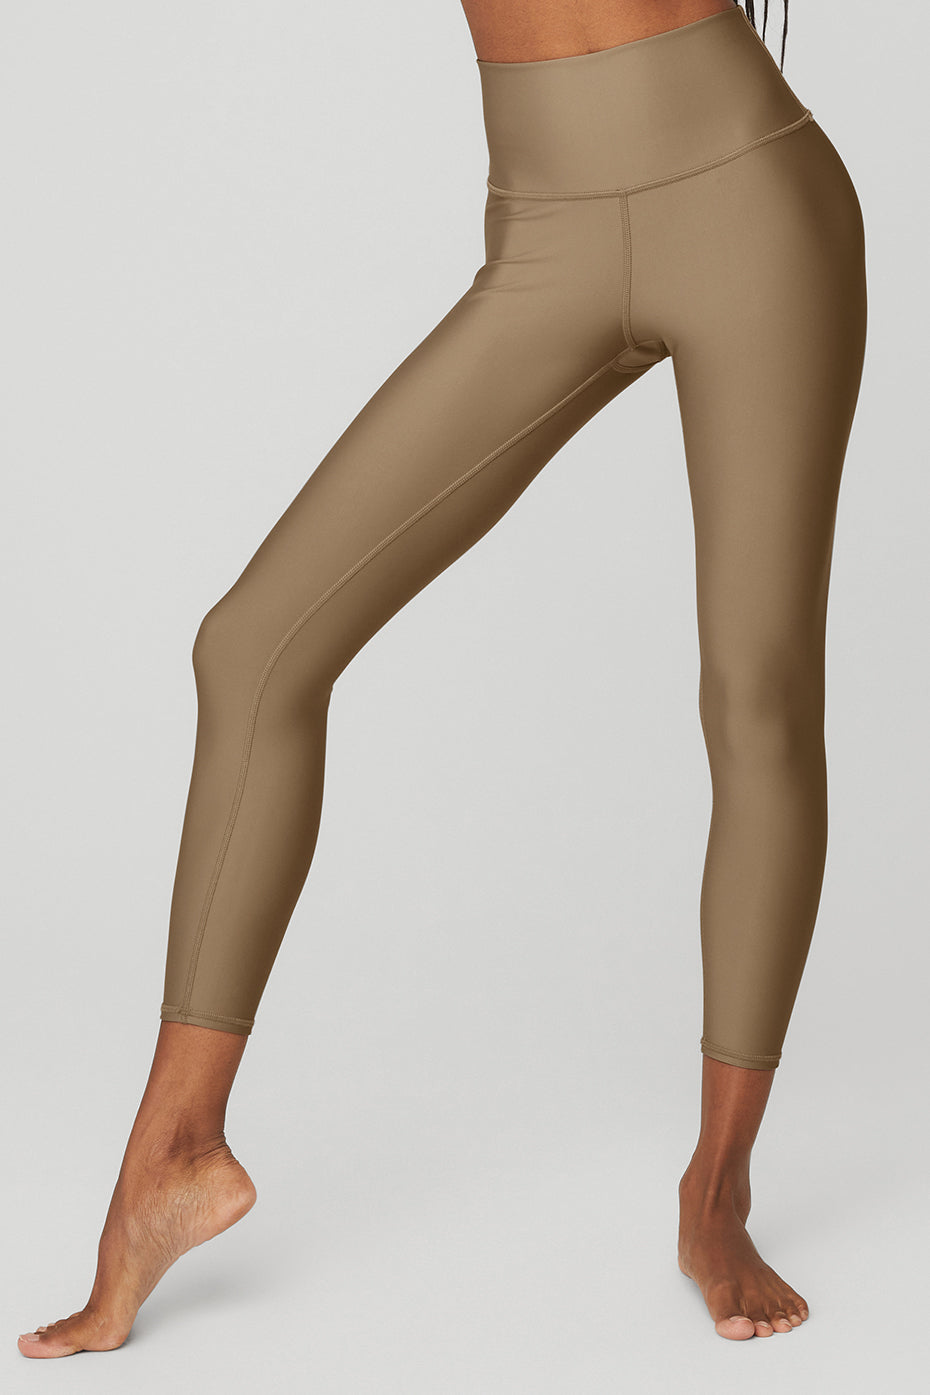 7/8 High-Waist Airlift Legging in Gravelstone by Alo Yoga - Work Well Daily